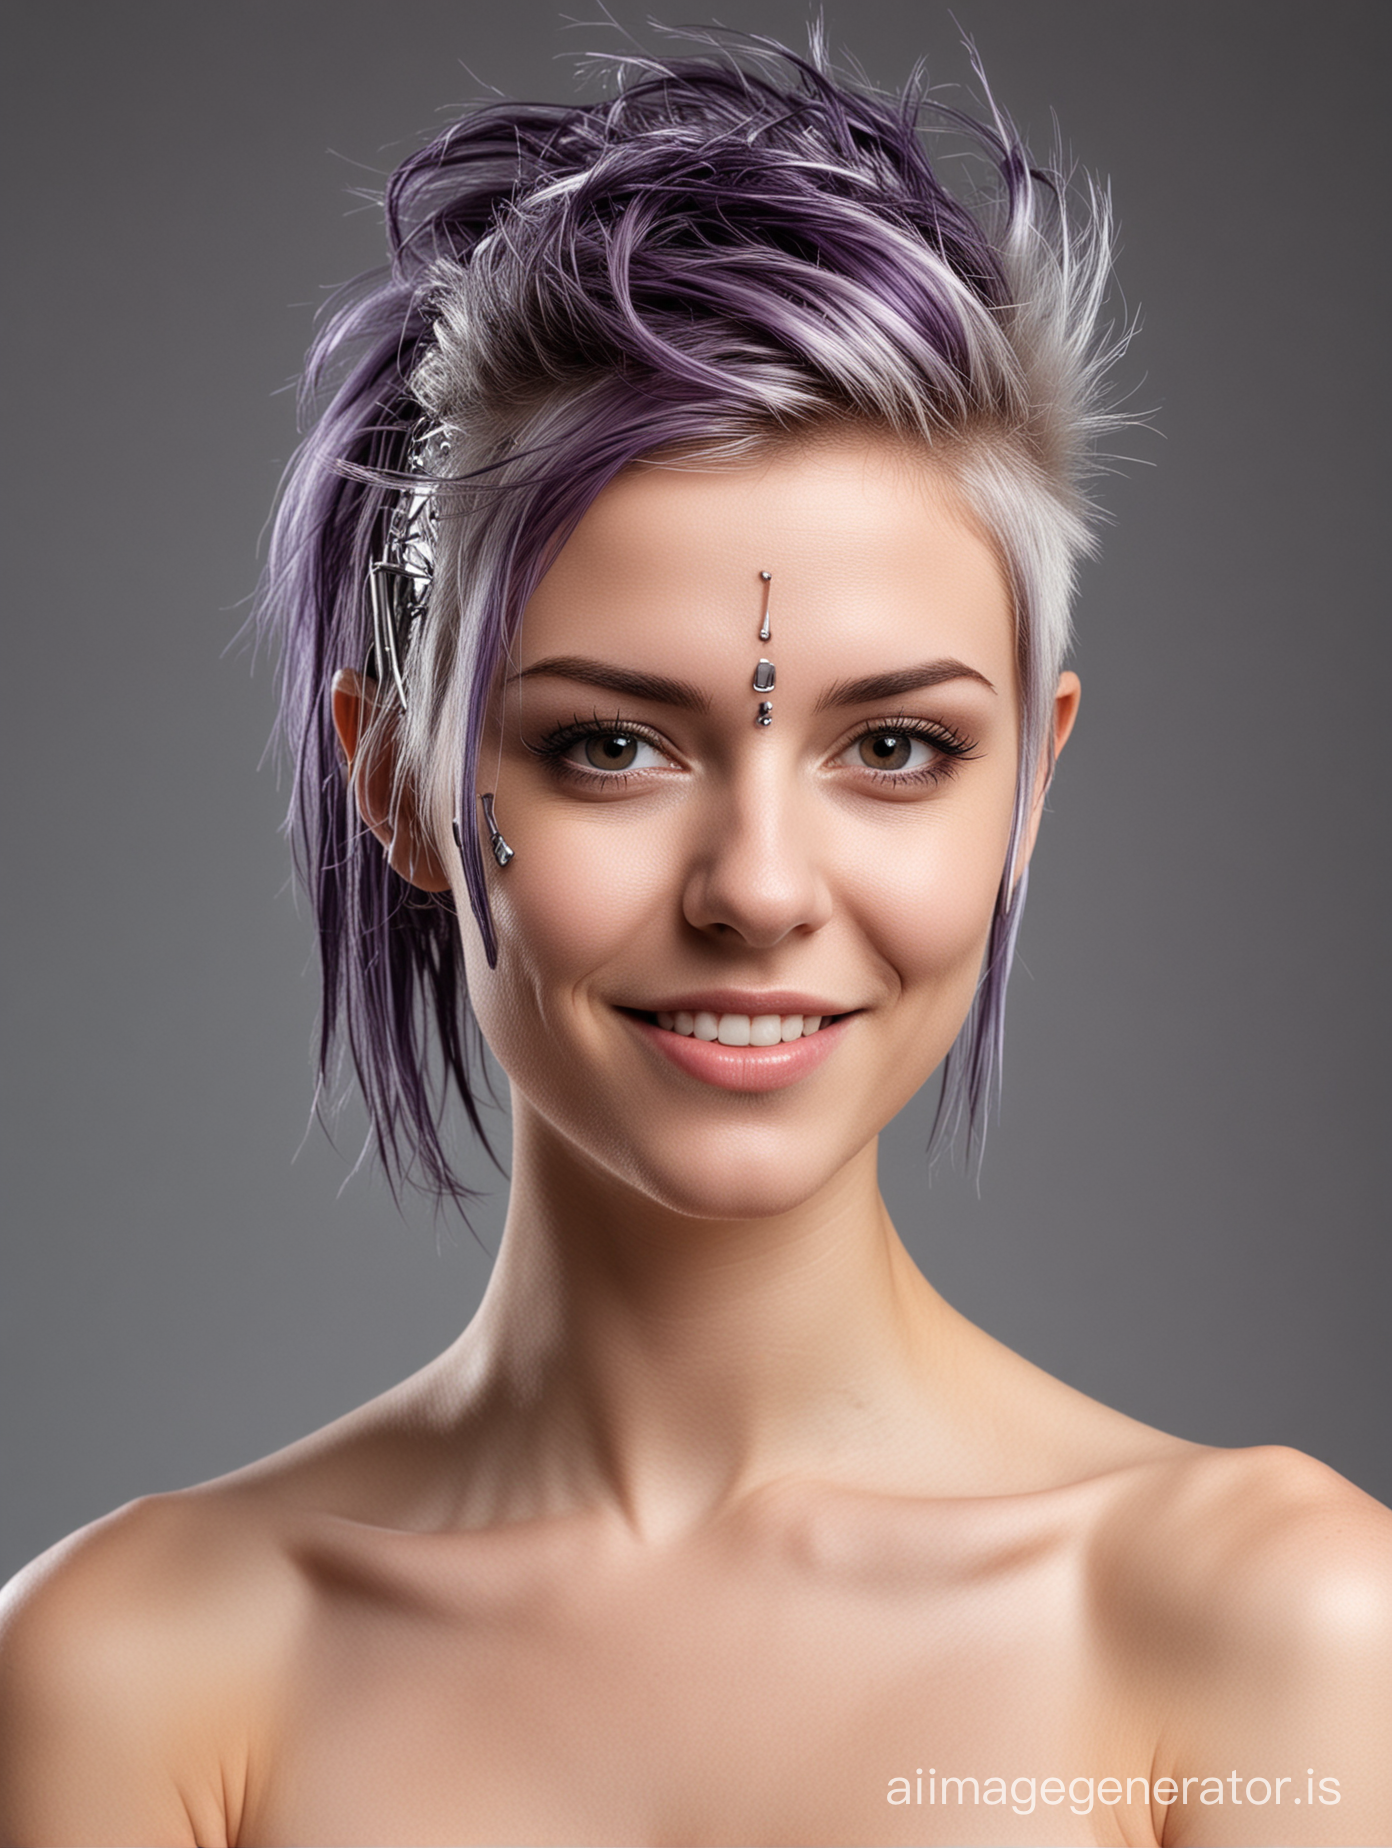 studio photoshoot of a naked shy young woman, cyber implants, facial cyber implants, sci fi, punk hair, sweet smile